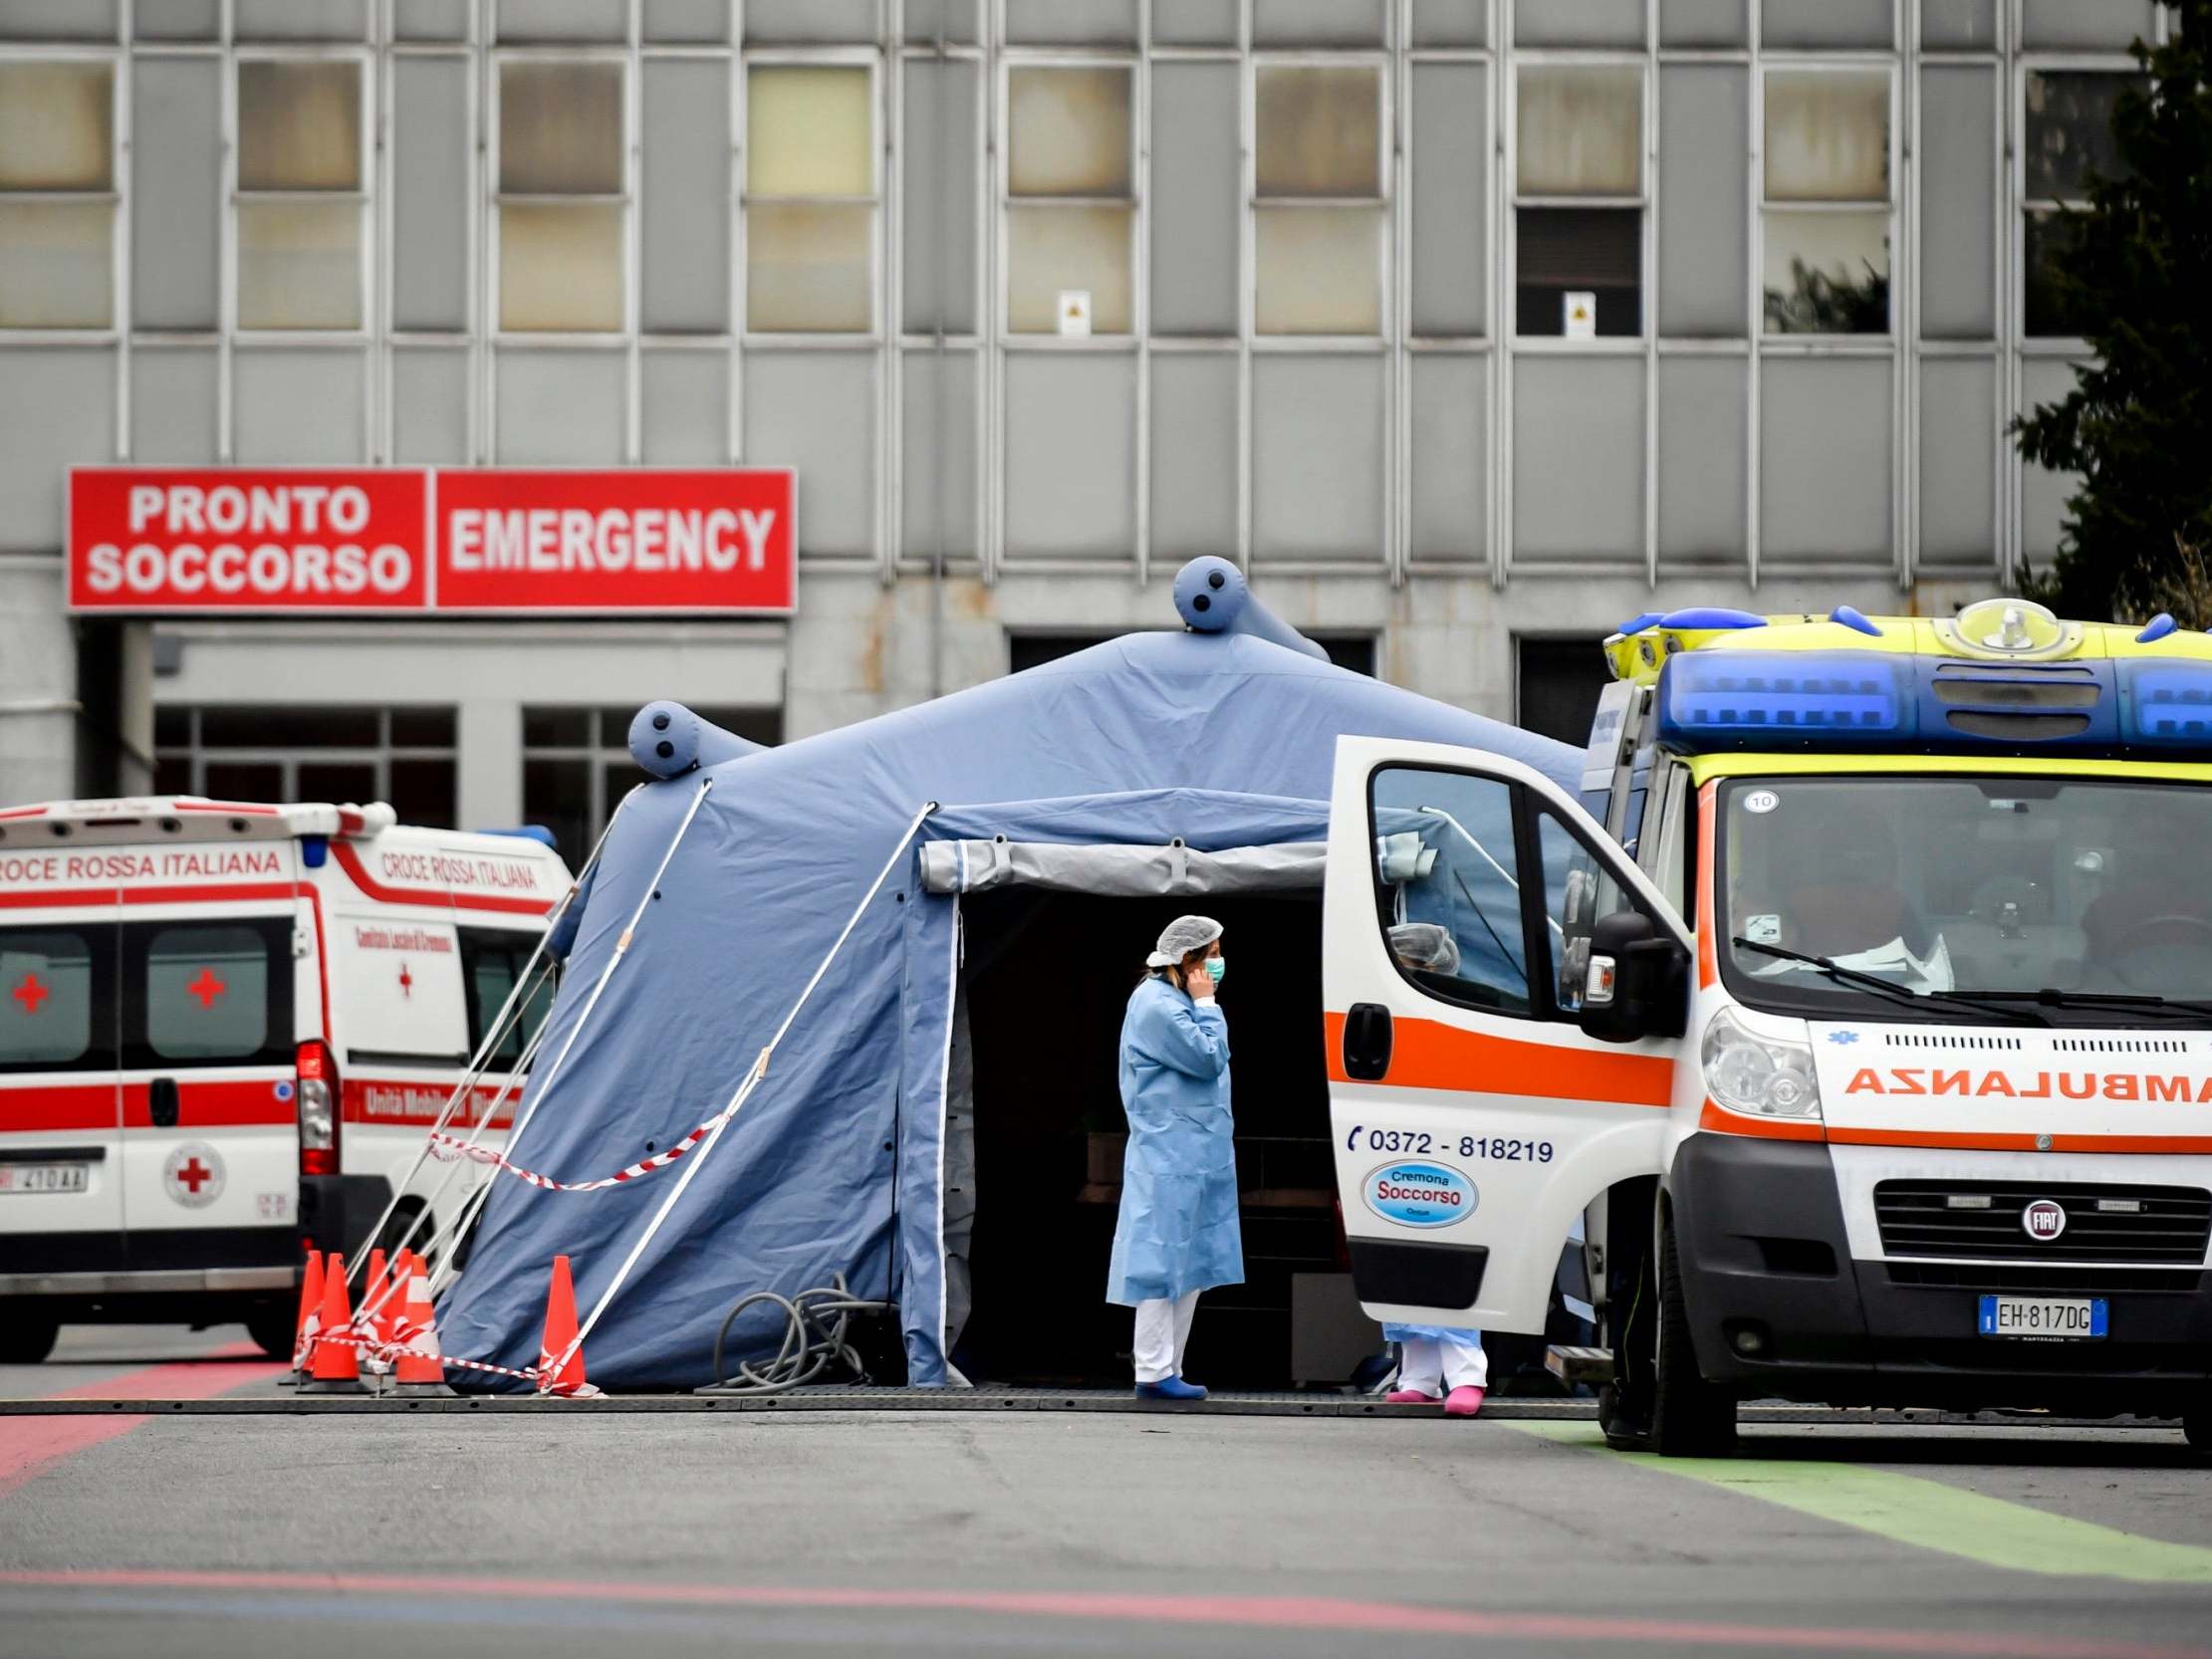 Paramedics stand by a tent that was set up outside the emergency ward of Cremona's hospital